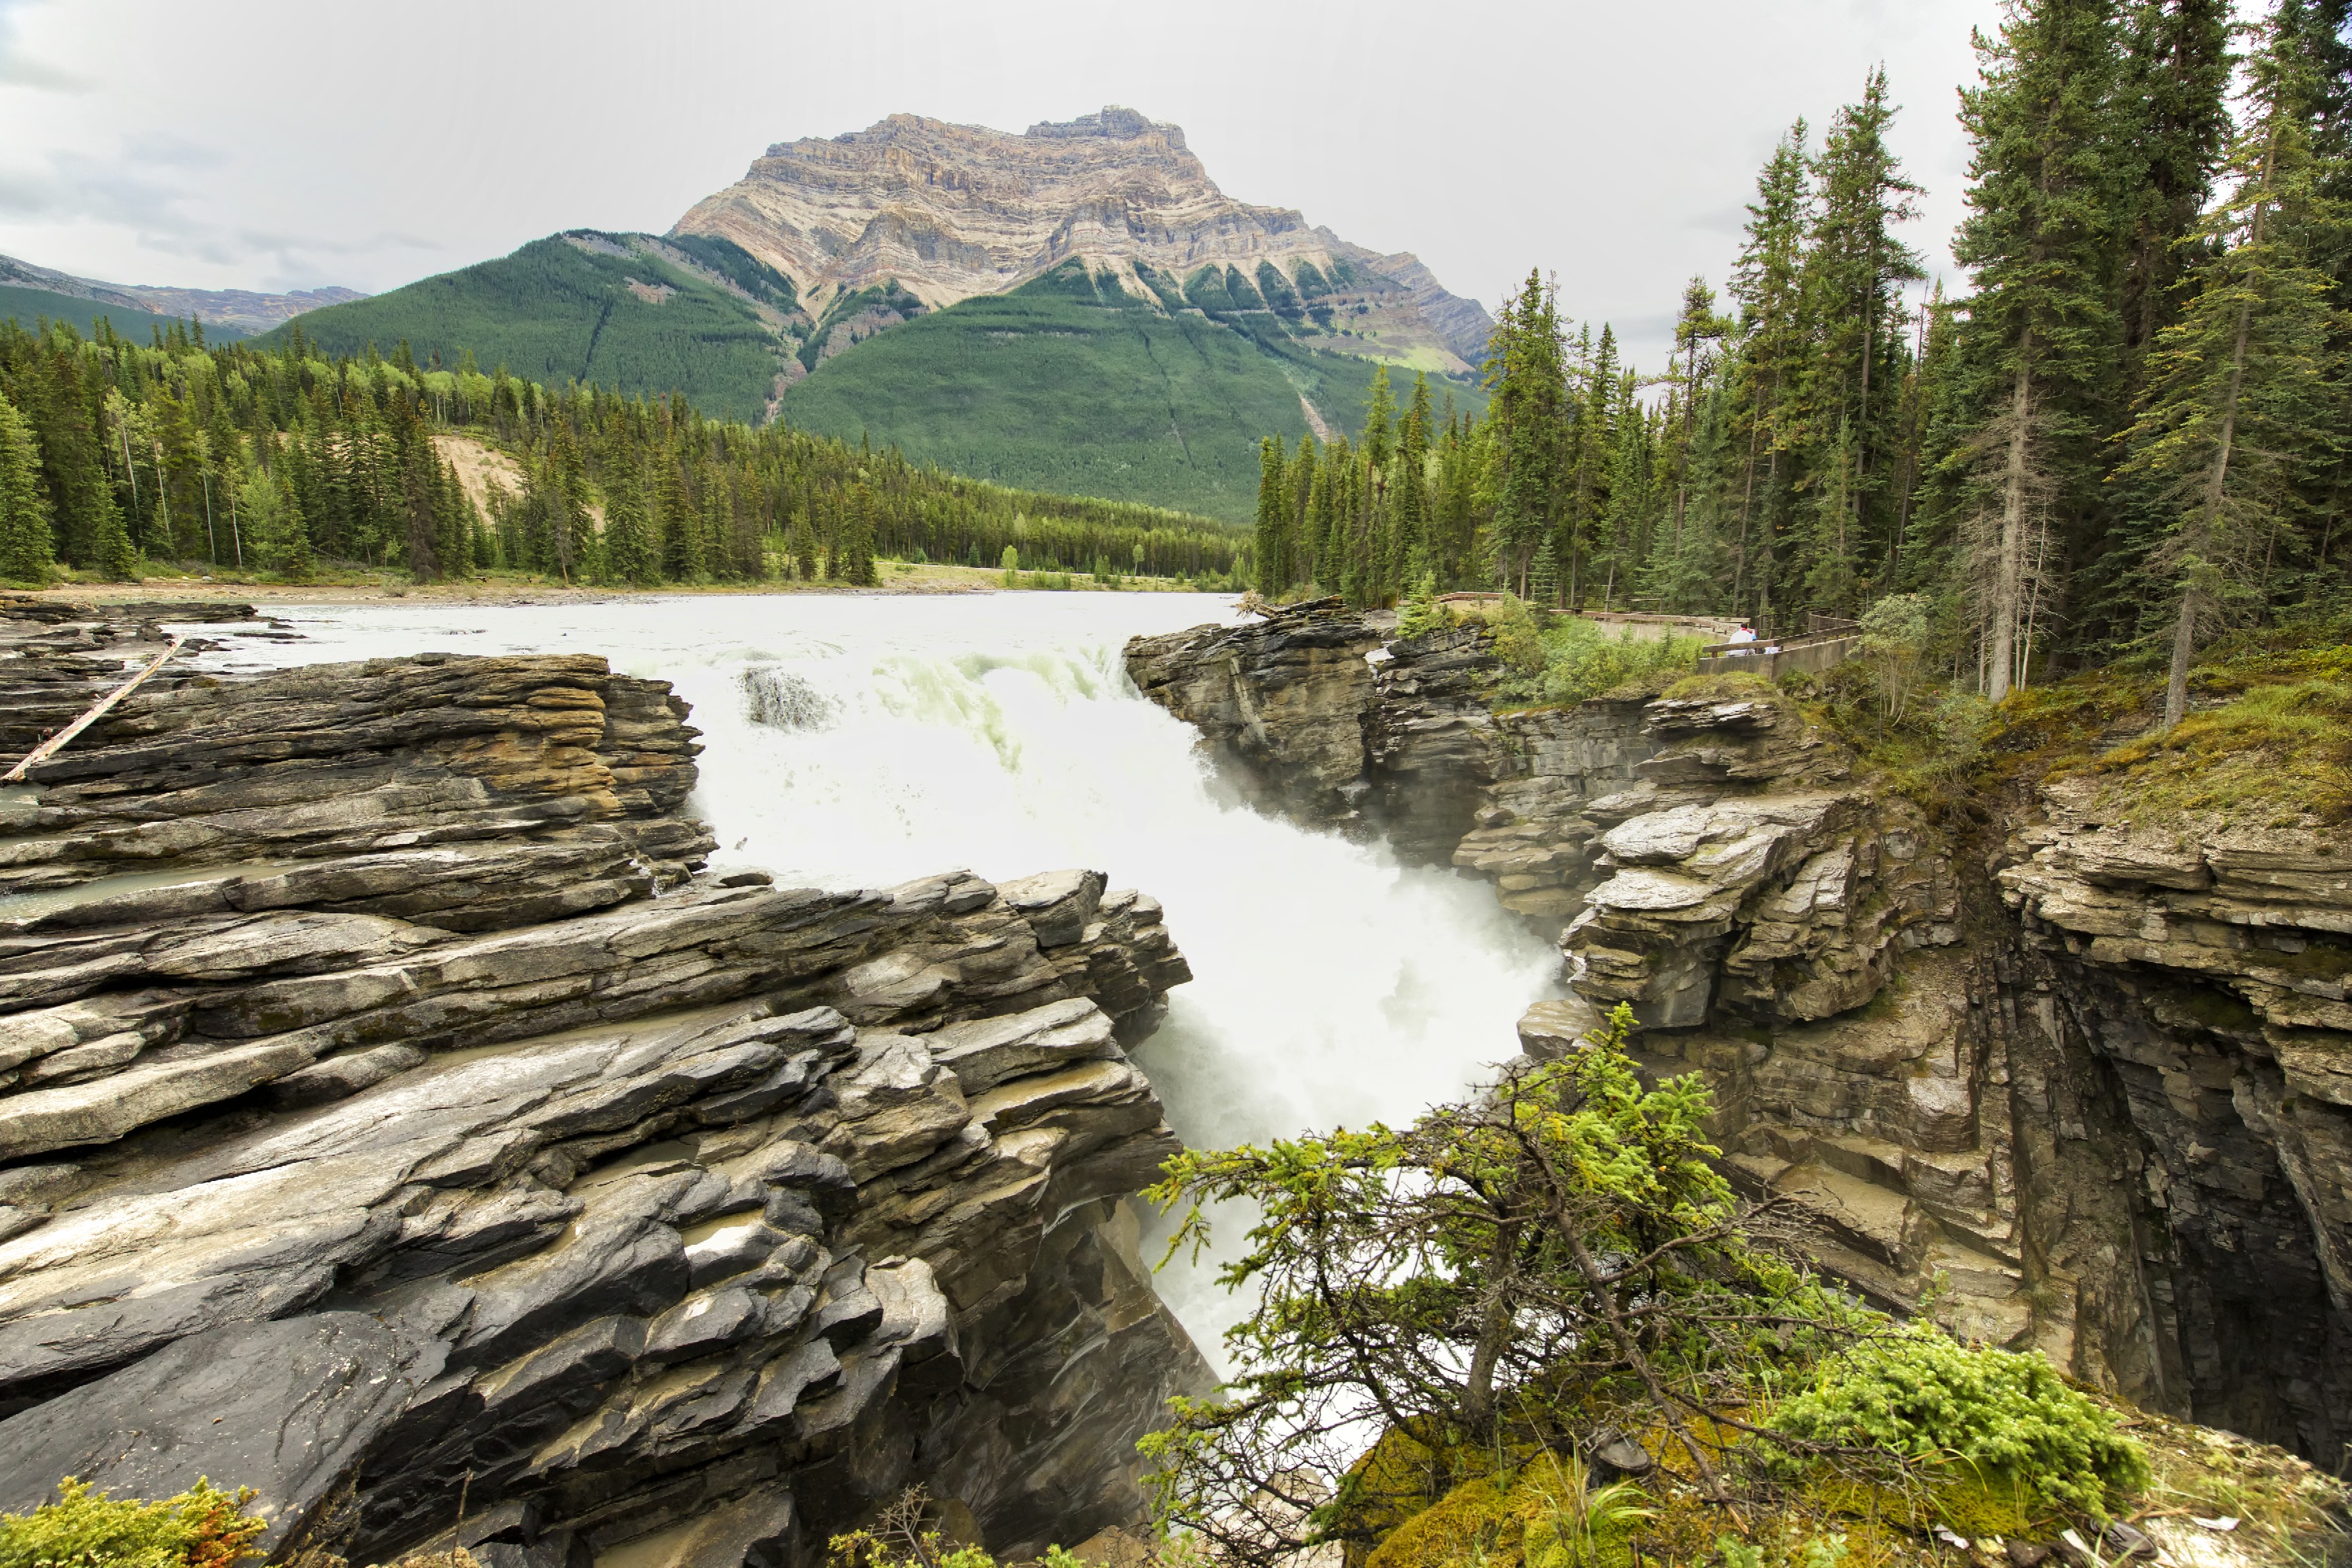 Athabasca Falls Waterfall Jasper National Park Canada River Forest Rock Mountain Nature 3391x2261